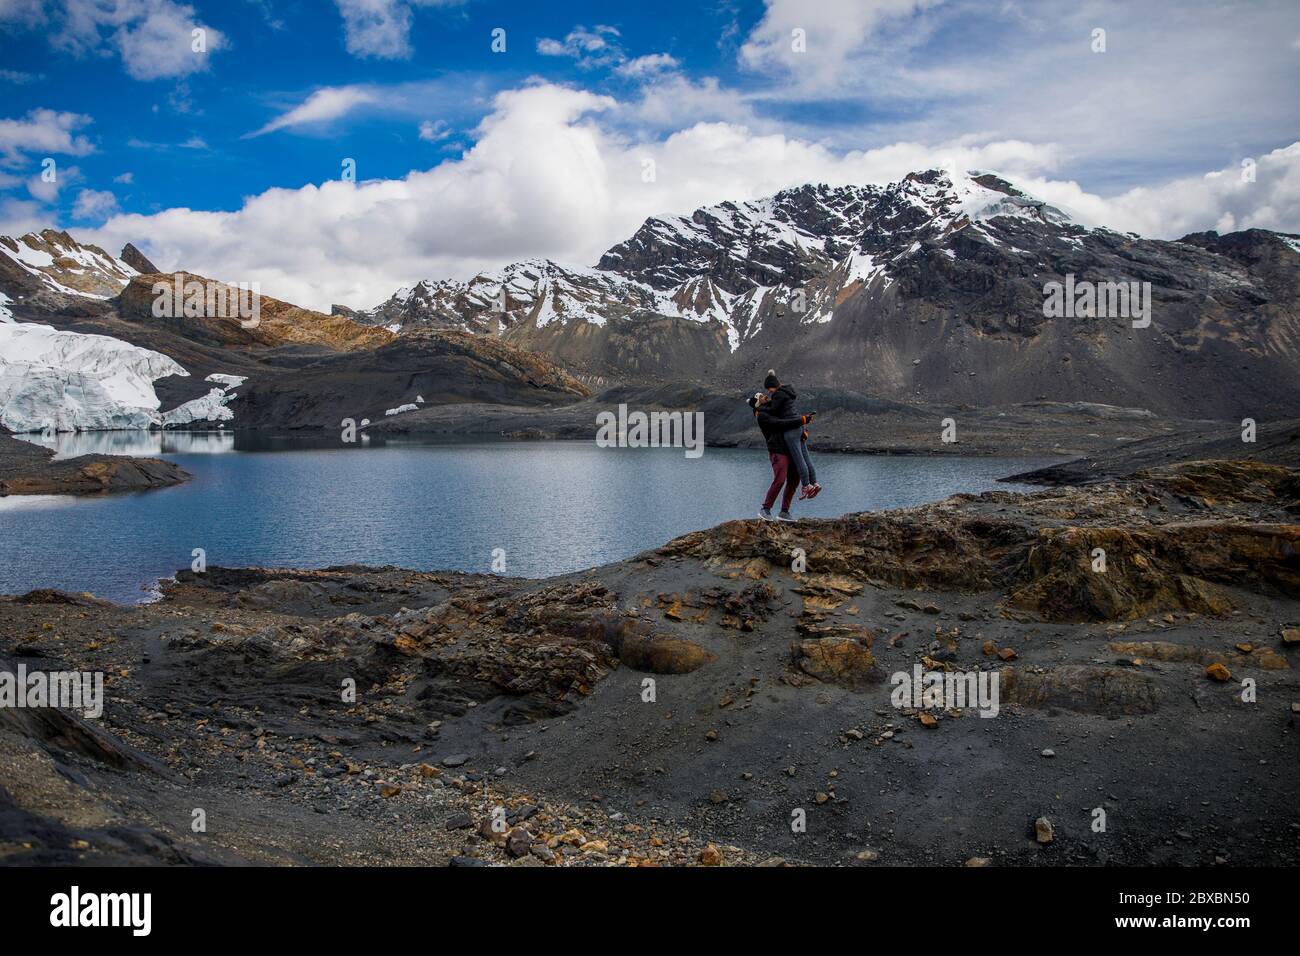 couple in a glacier, near a lake, mountains with snow in their peaks, clouds and blue sky Stock Photo